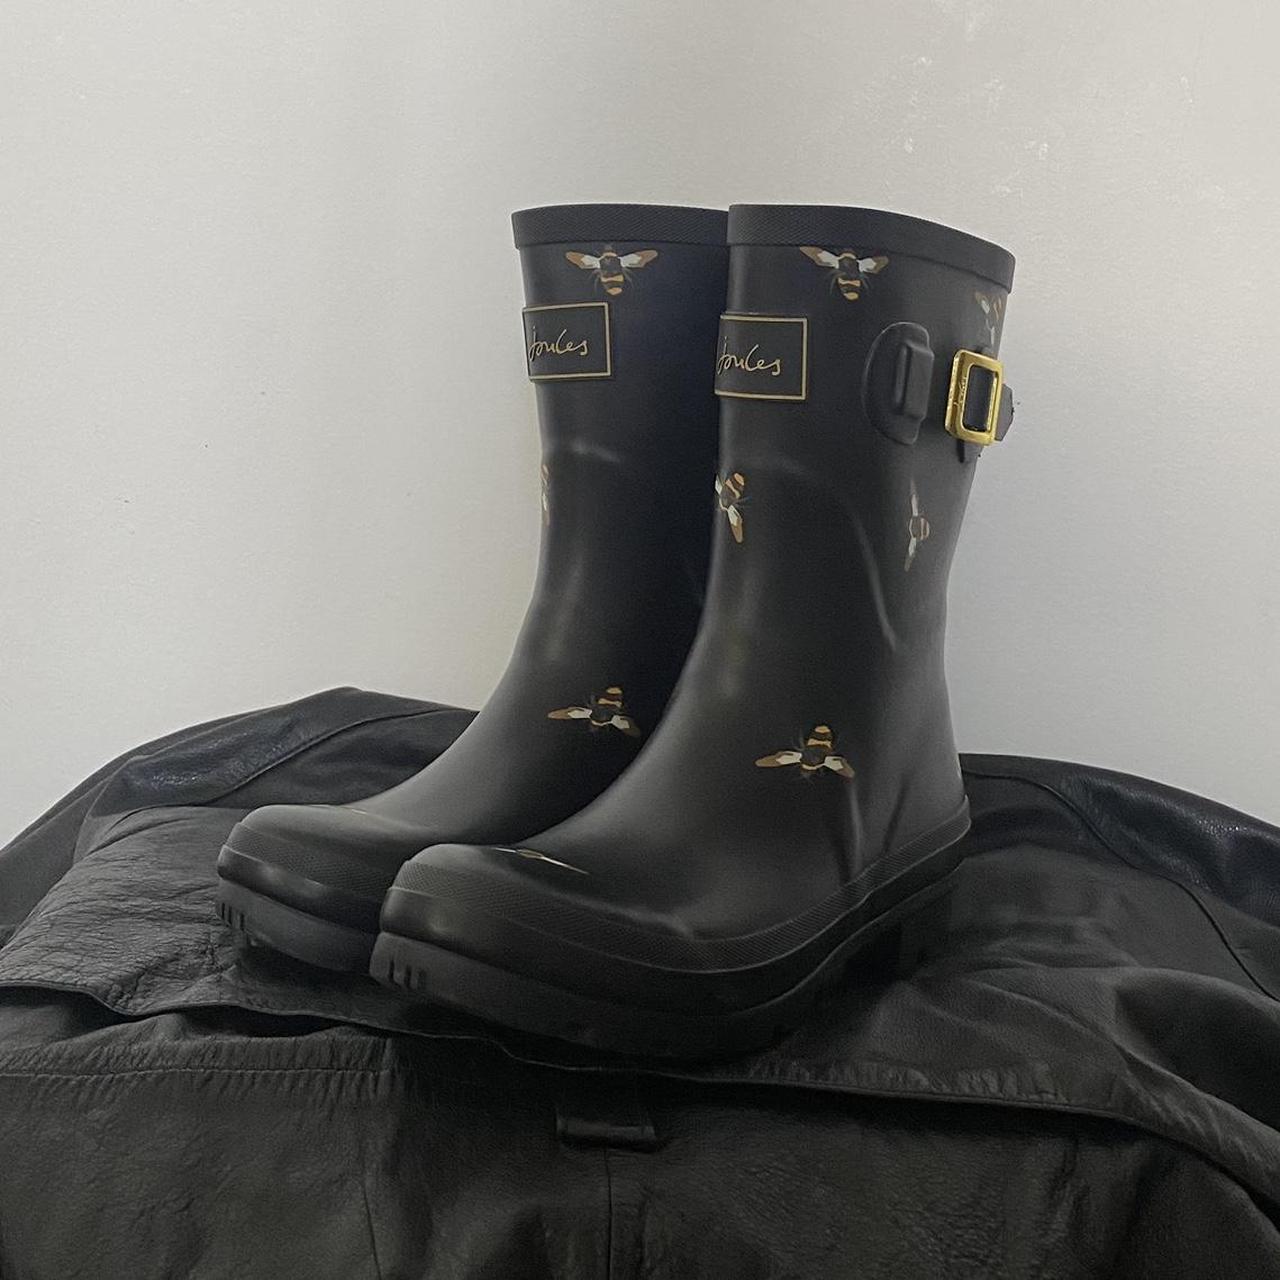 Joules Women's Black and Yellow Boots